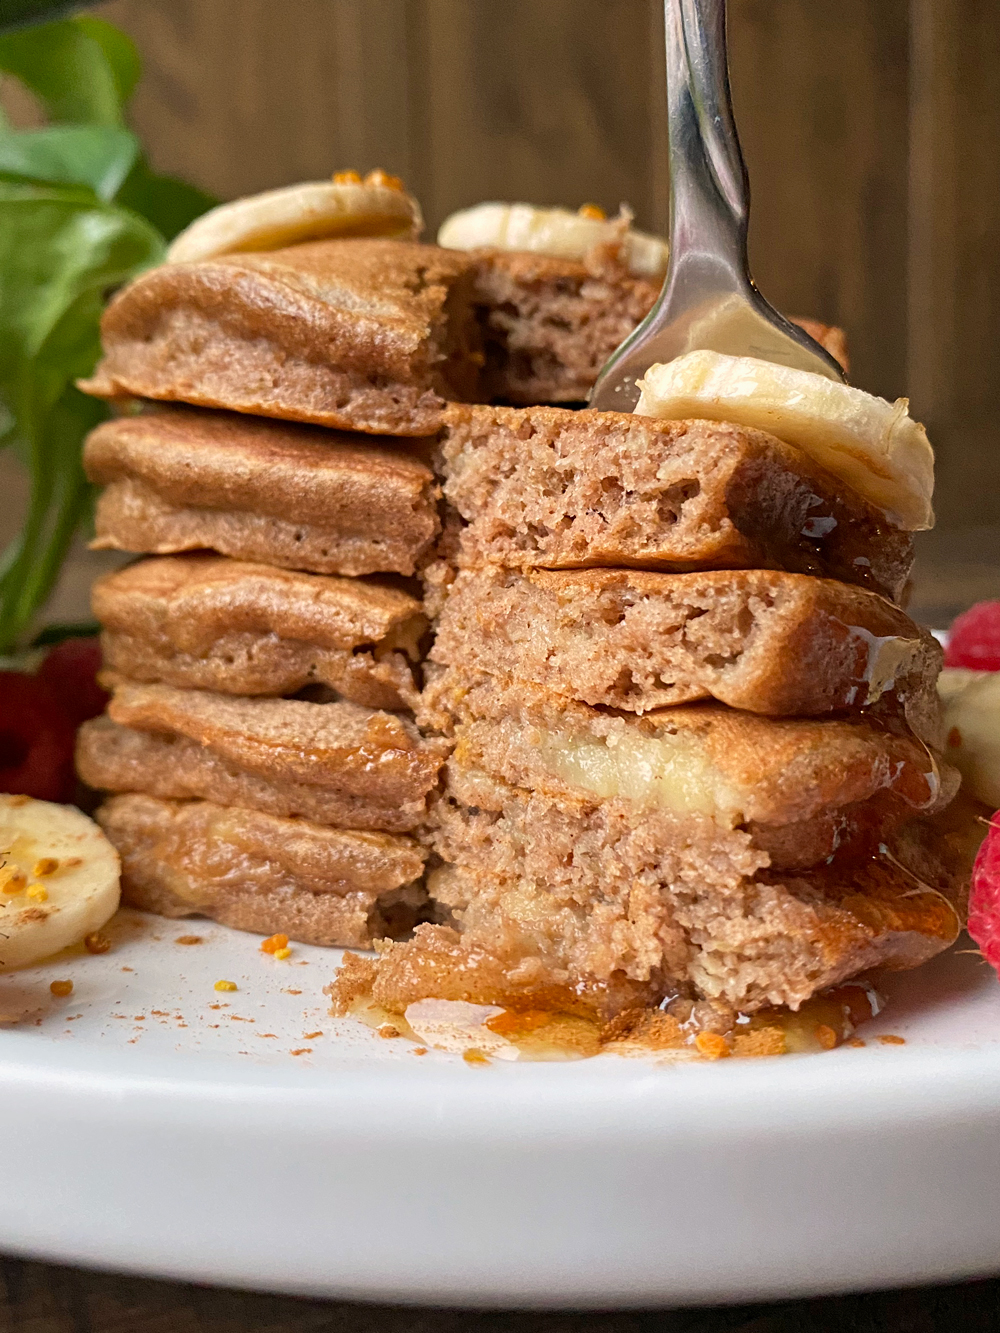 Sliced stack of cassava flour pancakes to show the inside texture.